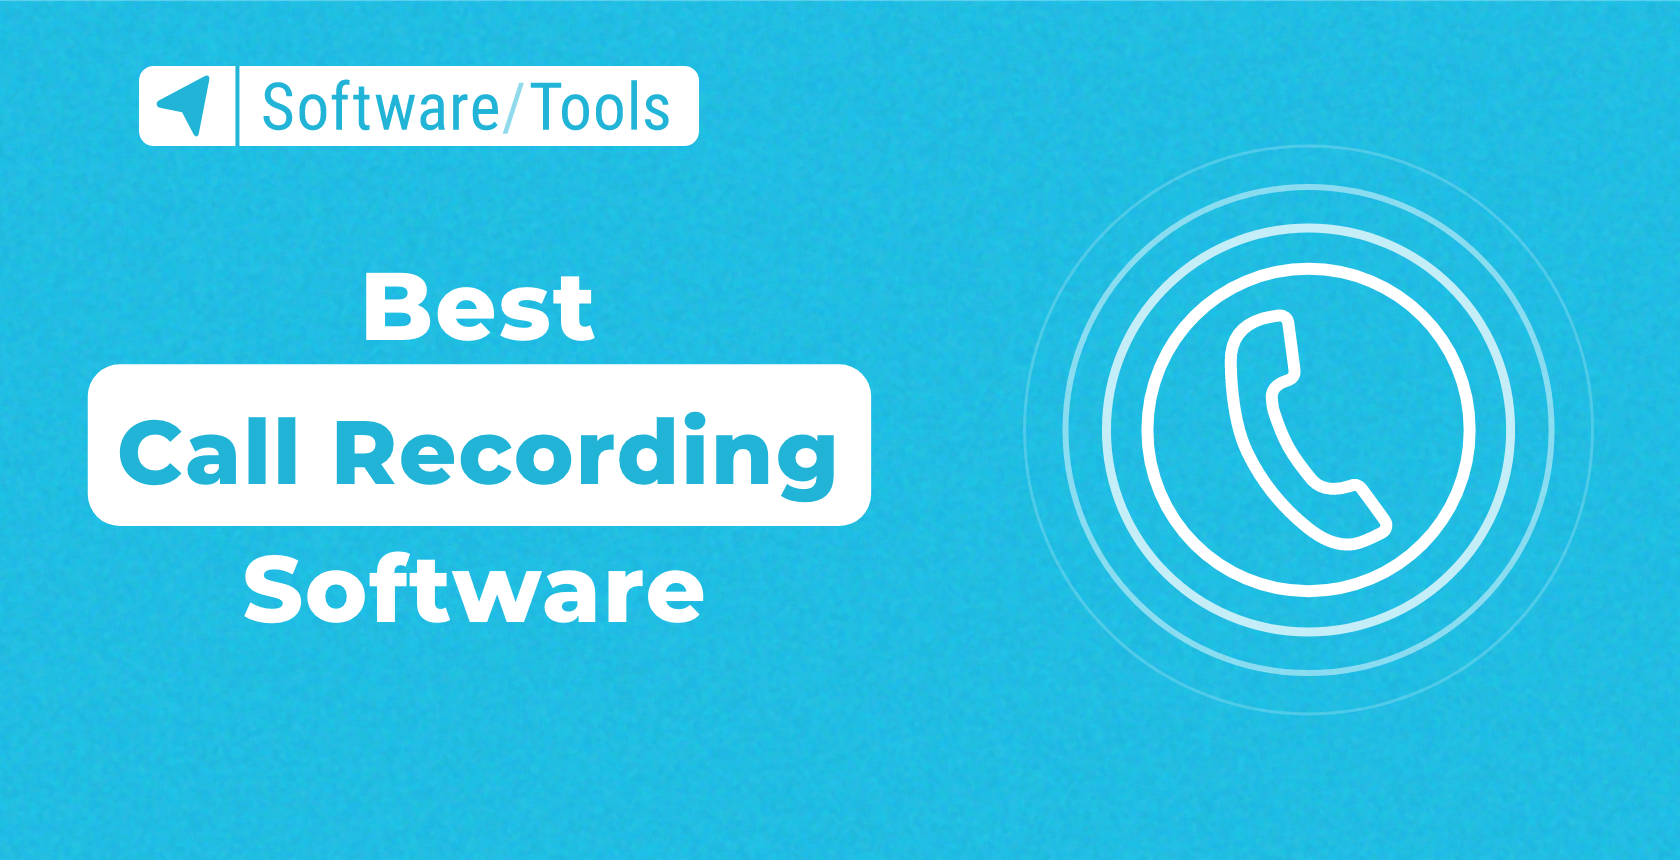 The Best Call Recording Software in 2023